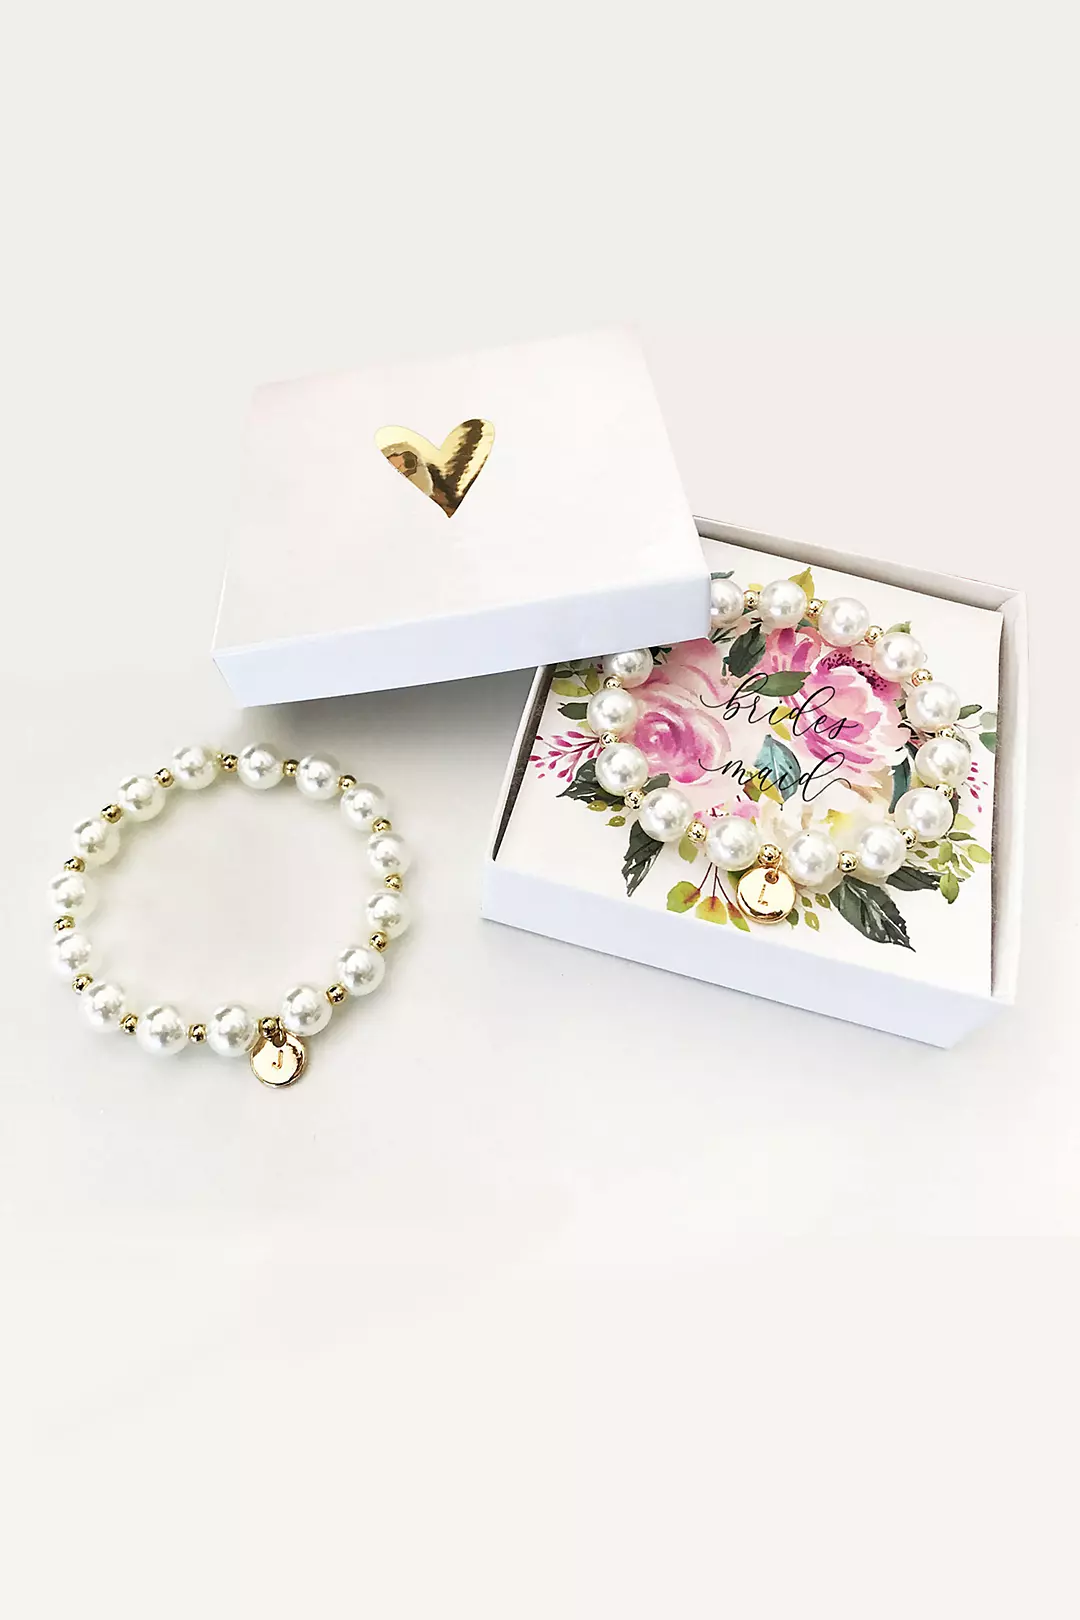 Personalized Monogram Pearl Bracelet with Gift Box Image